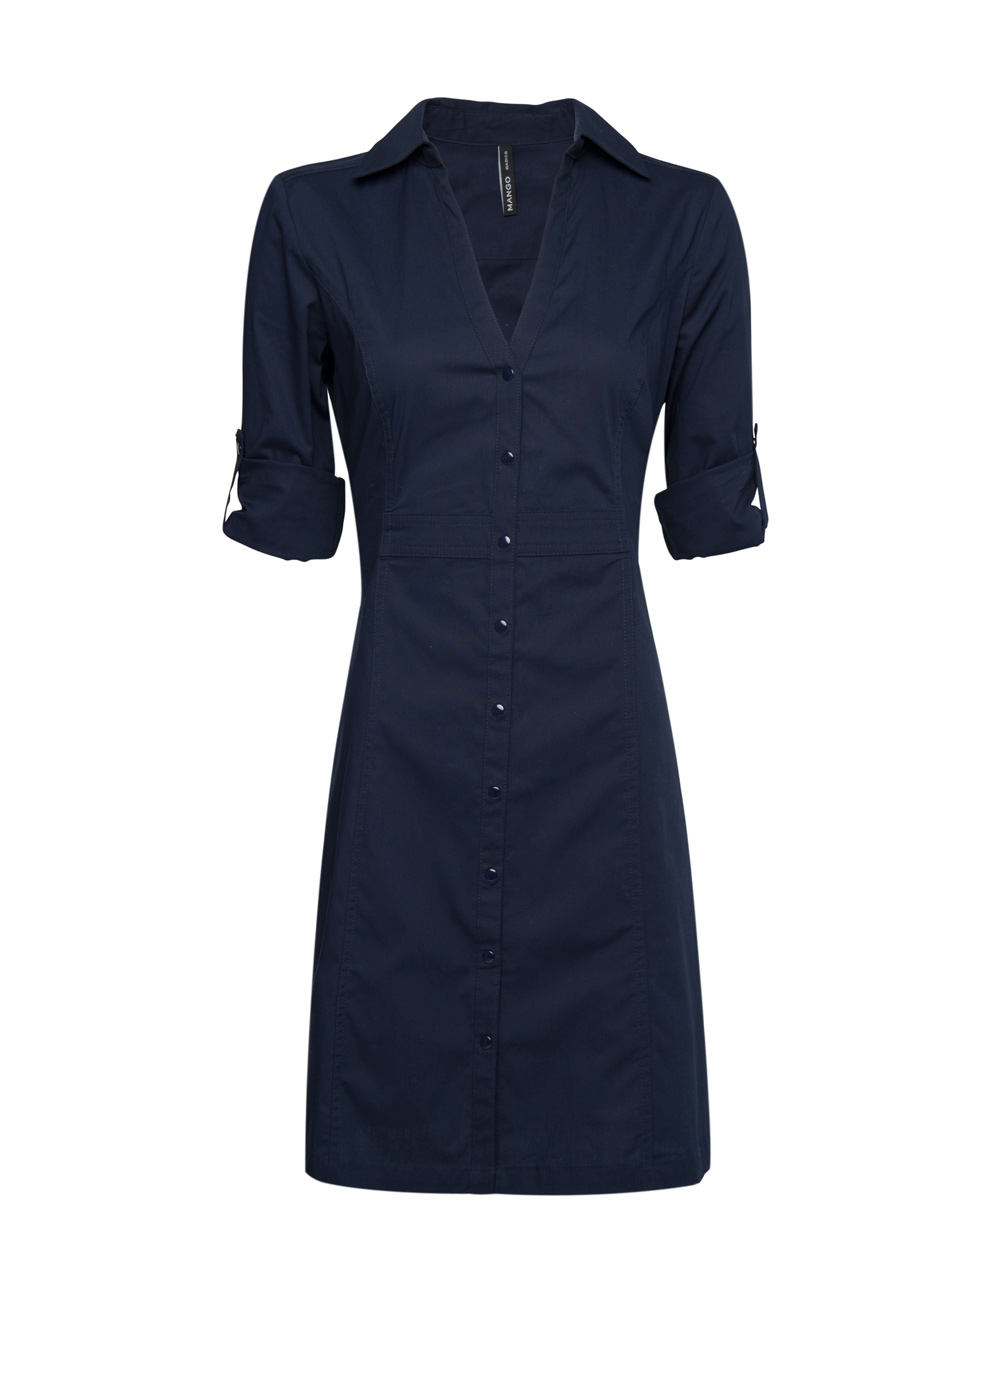 Lyst - Mango Fitted Stretch-Cotton Shirt Dress in Blue